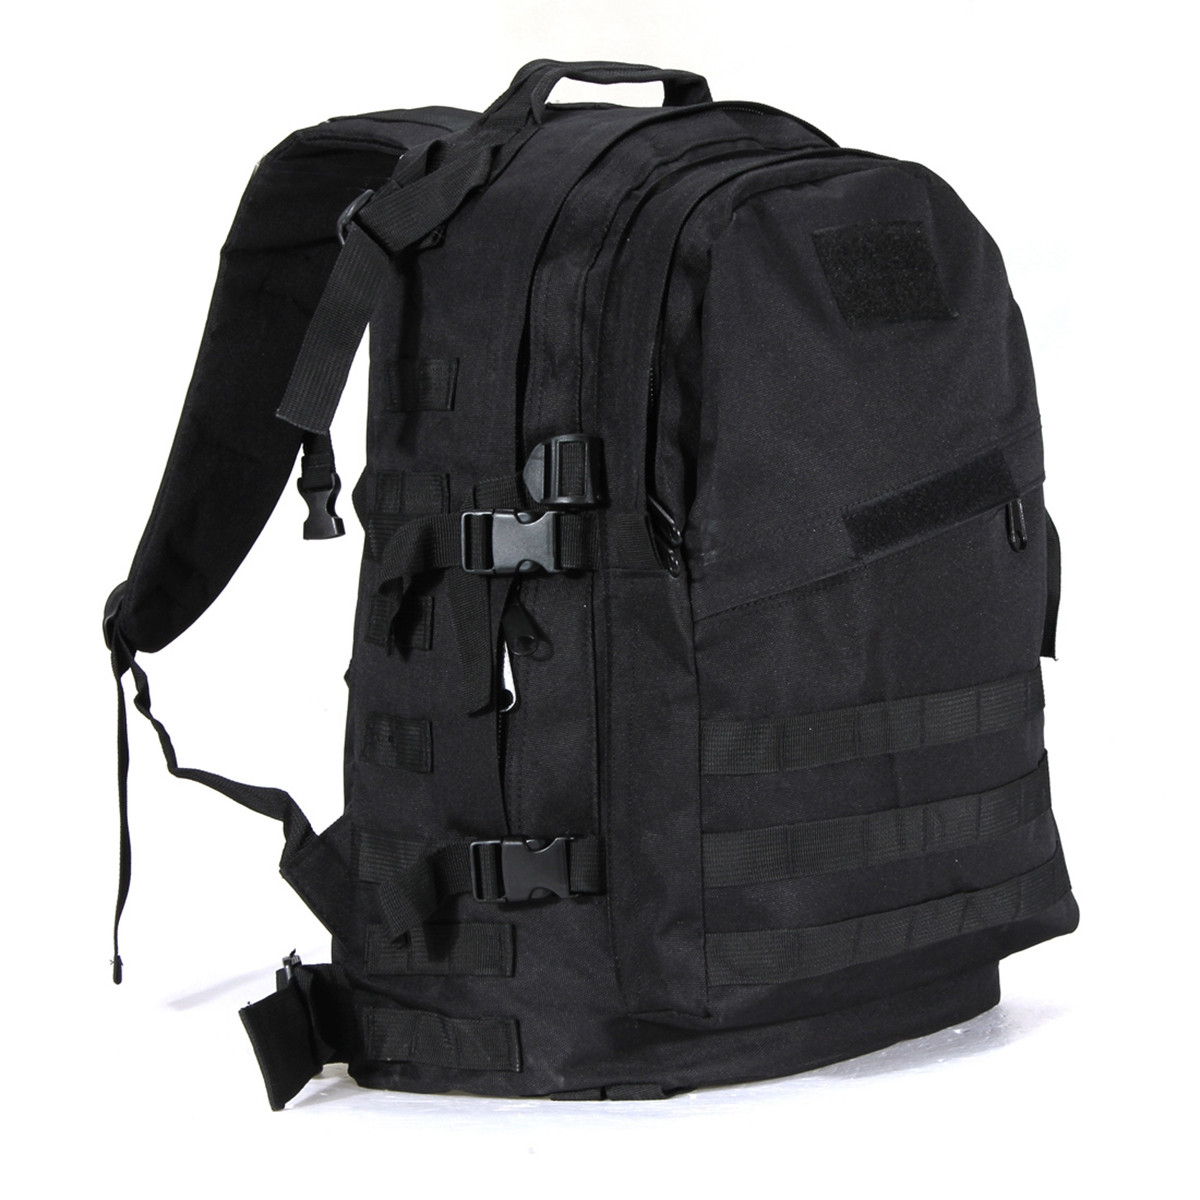 AMTOA-40L-3D-Outdoor-Molle-Military-Tactical-Rucksack-Backpack-Camping-Hiking-Bag-1817259-2